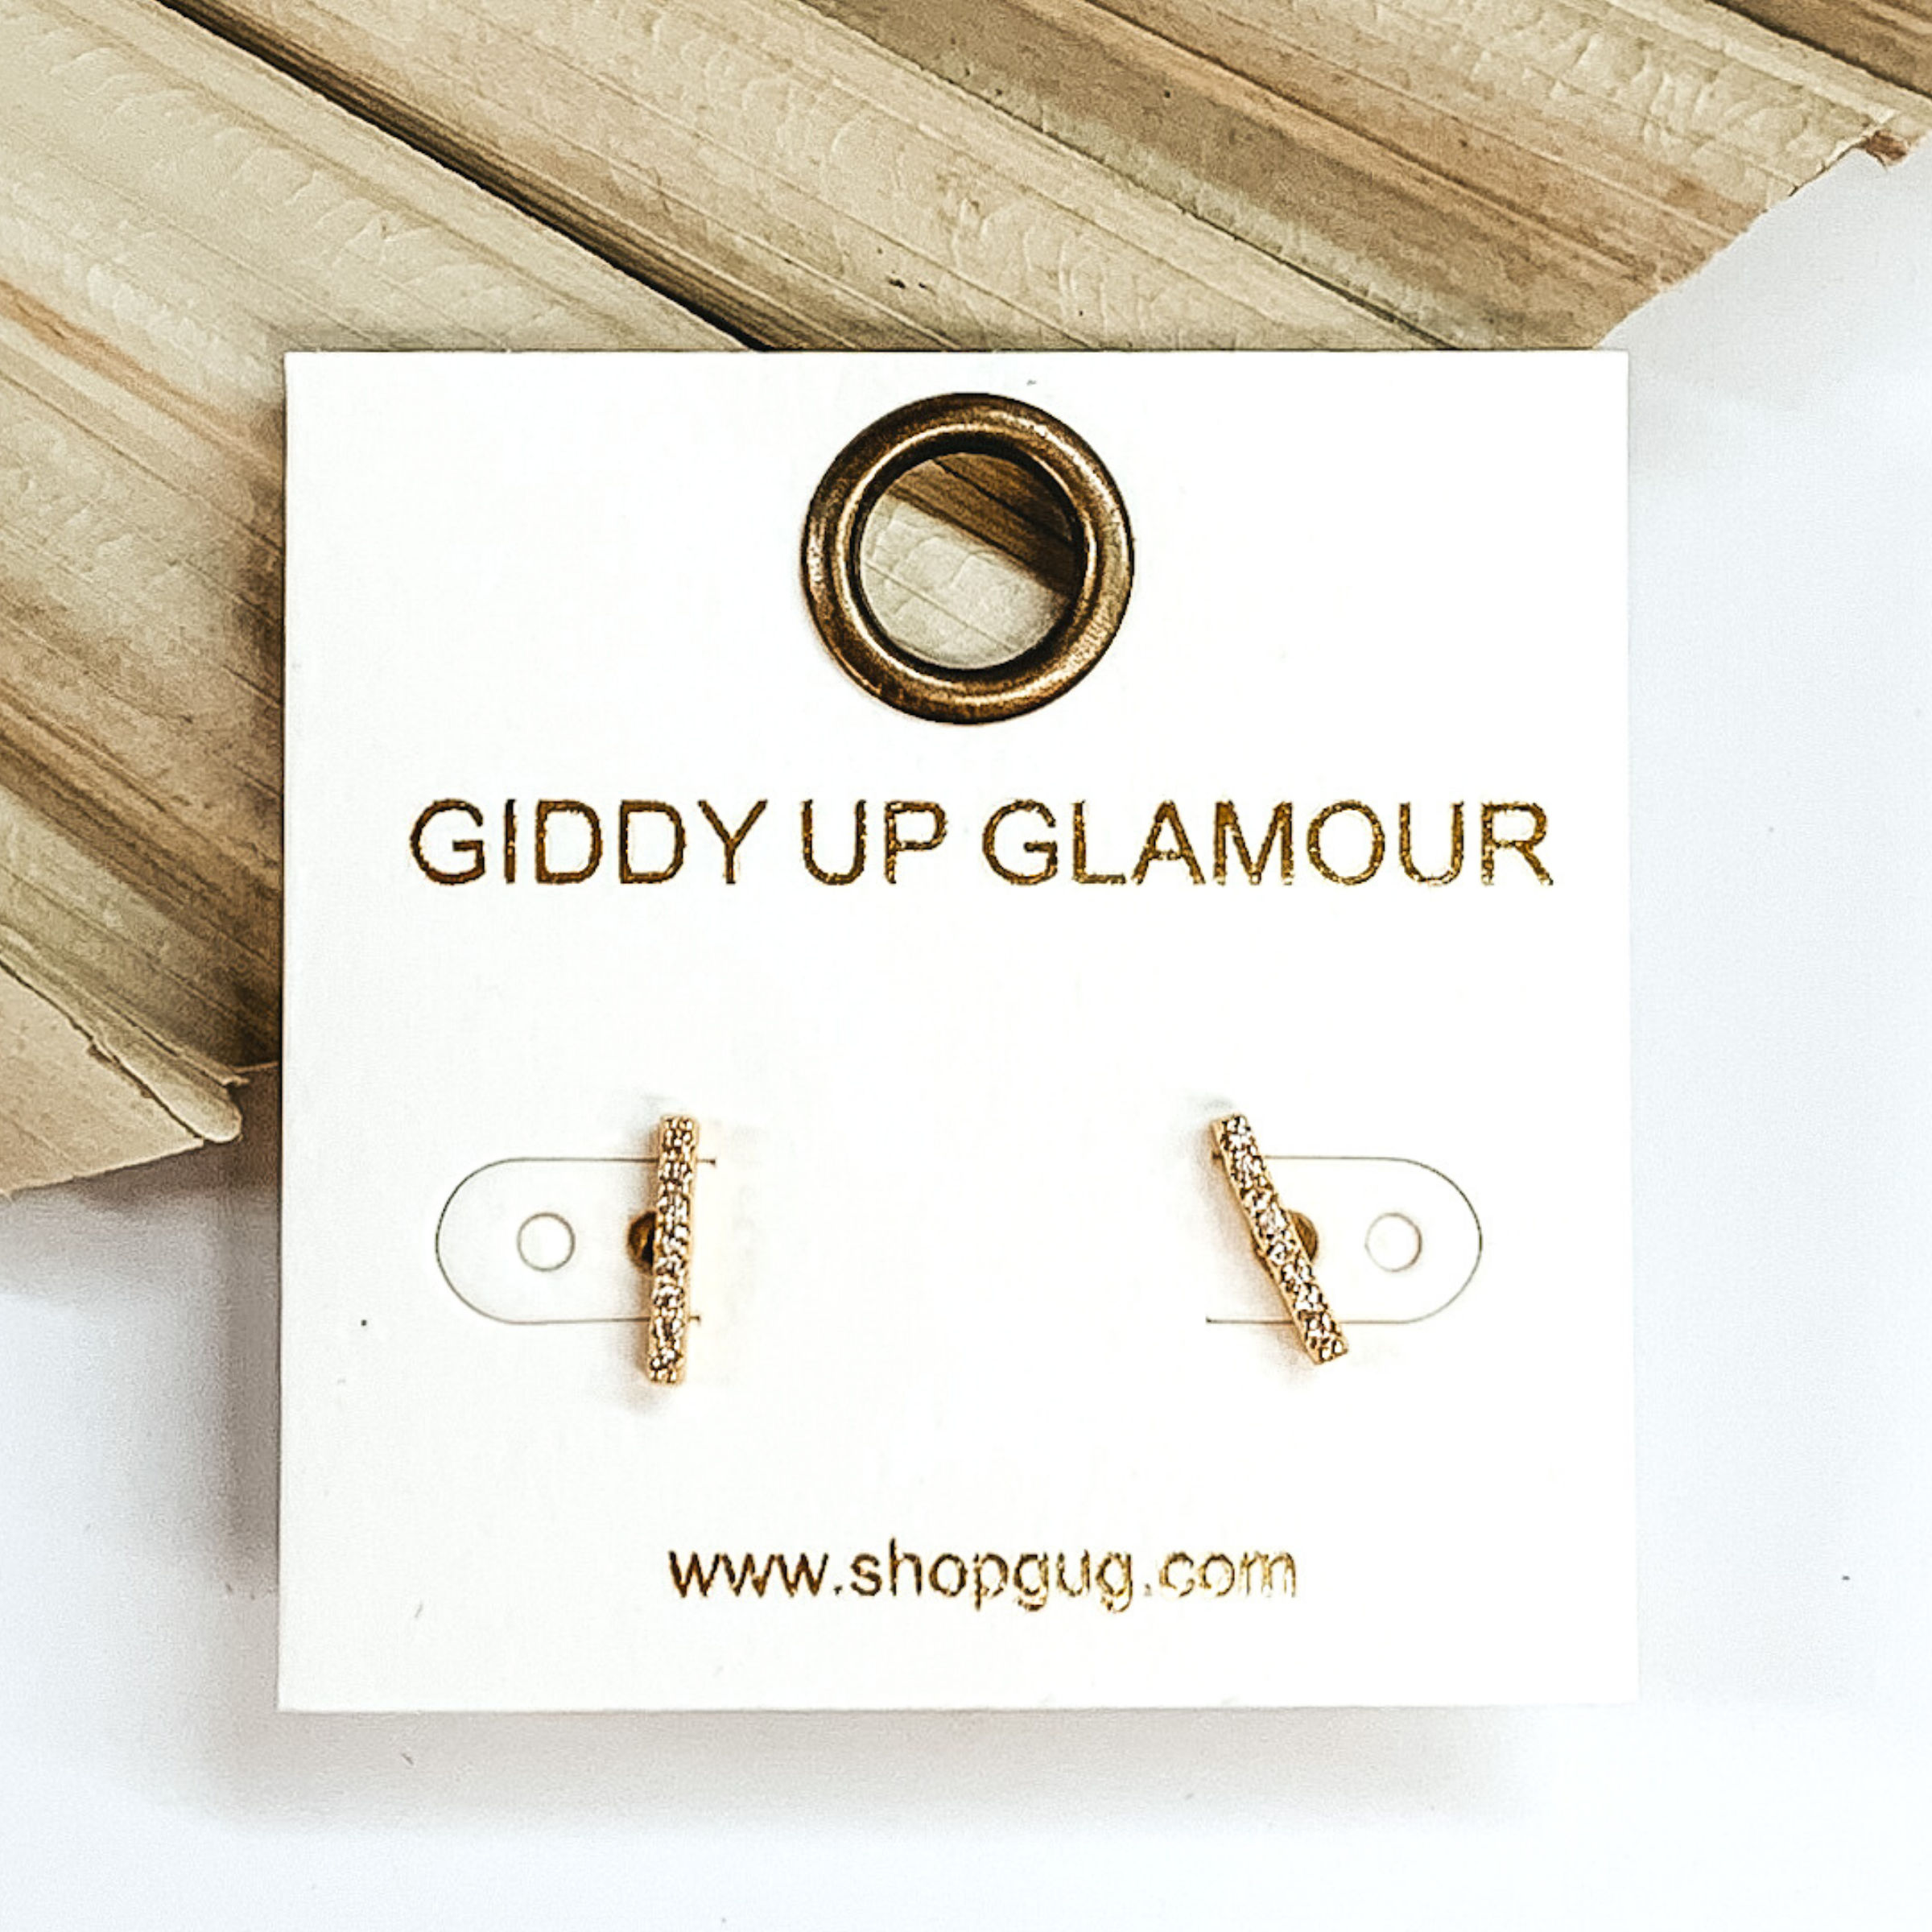 Gold and clear crystals mini bar stud earrings. These earrings are pictured laying on a green palm leaf on a white background.